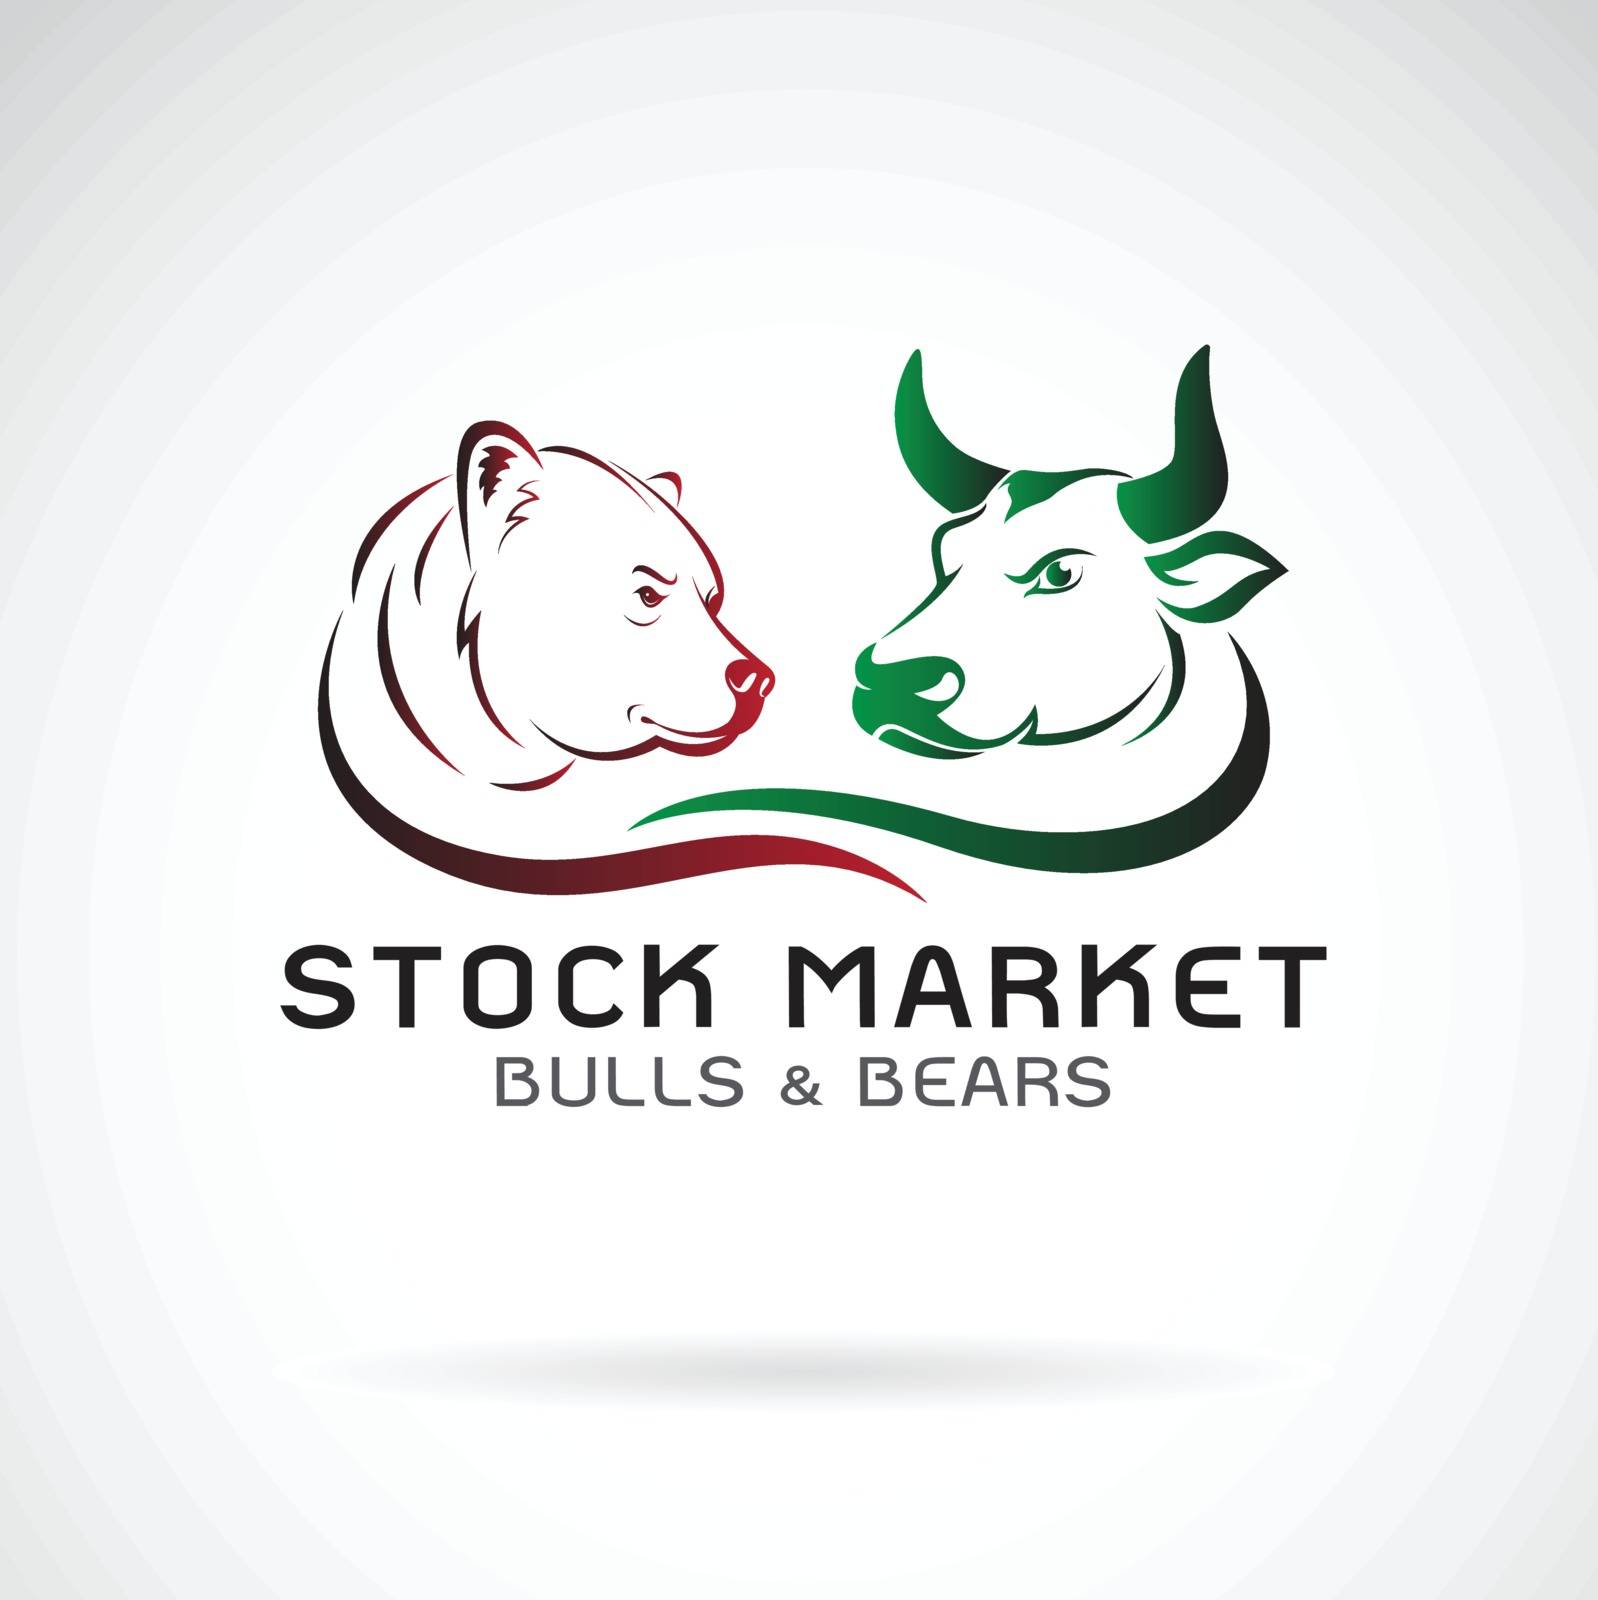 Vector of bull and bear symbols of stock market trends. Stock ma by yod67